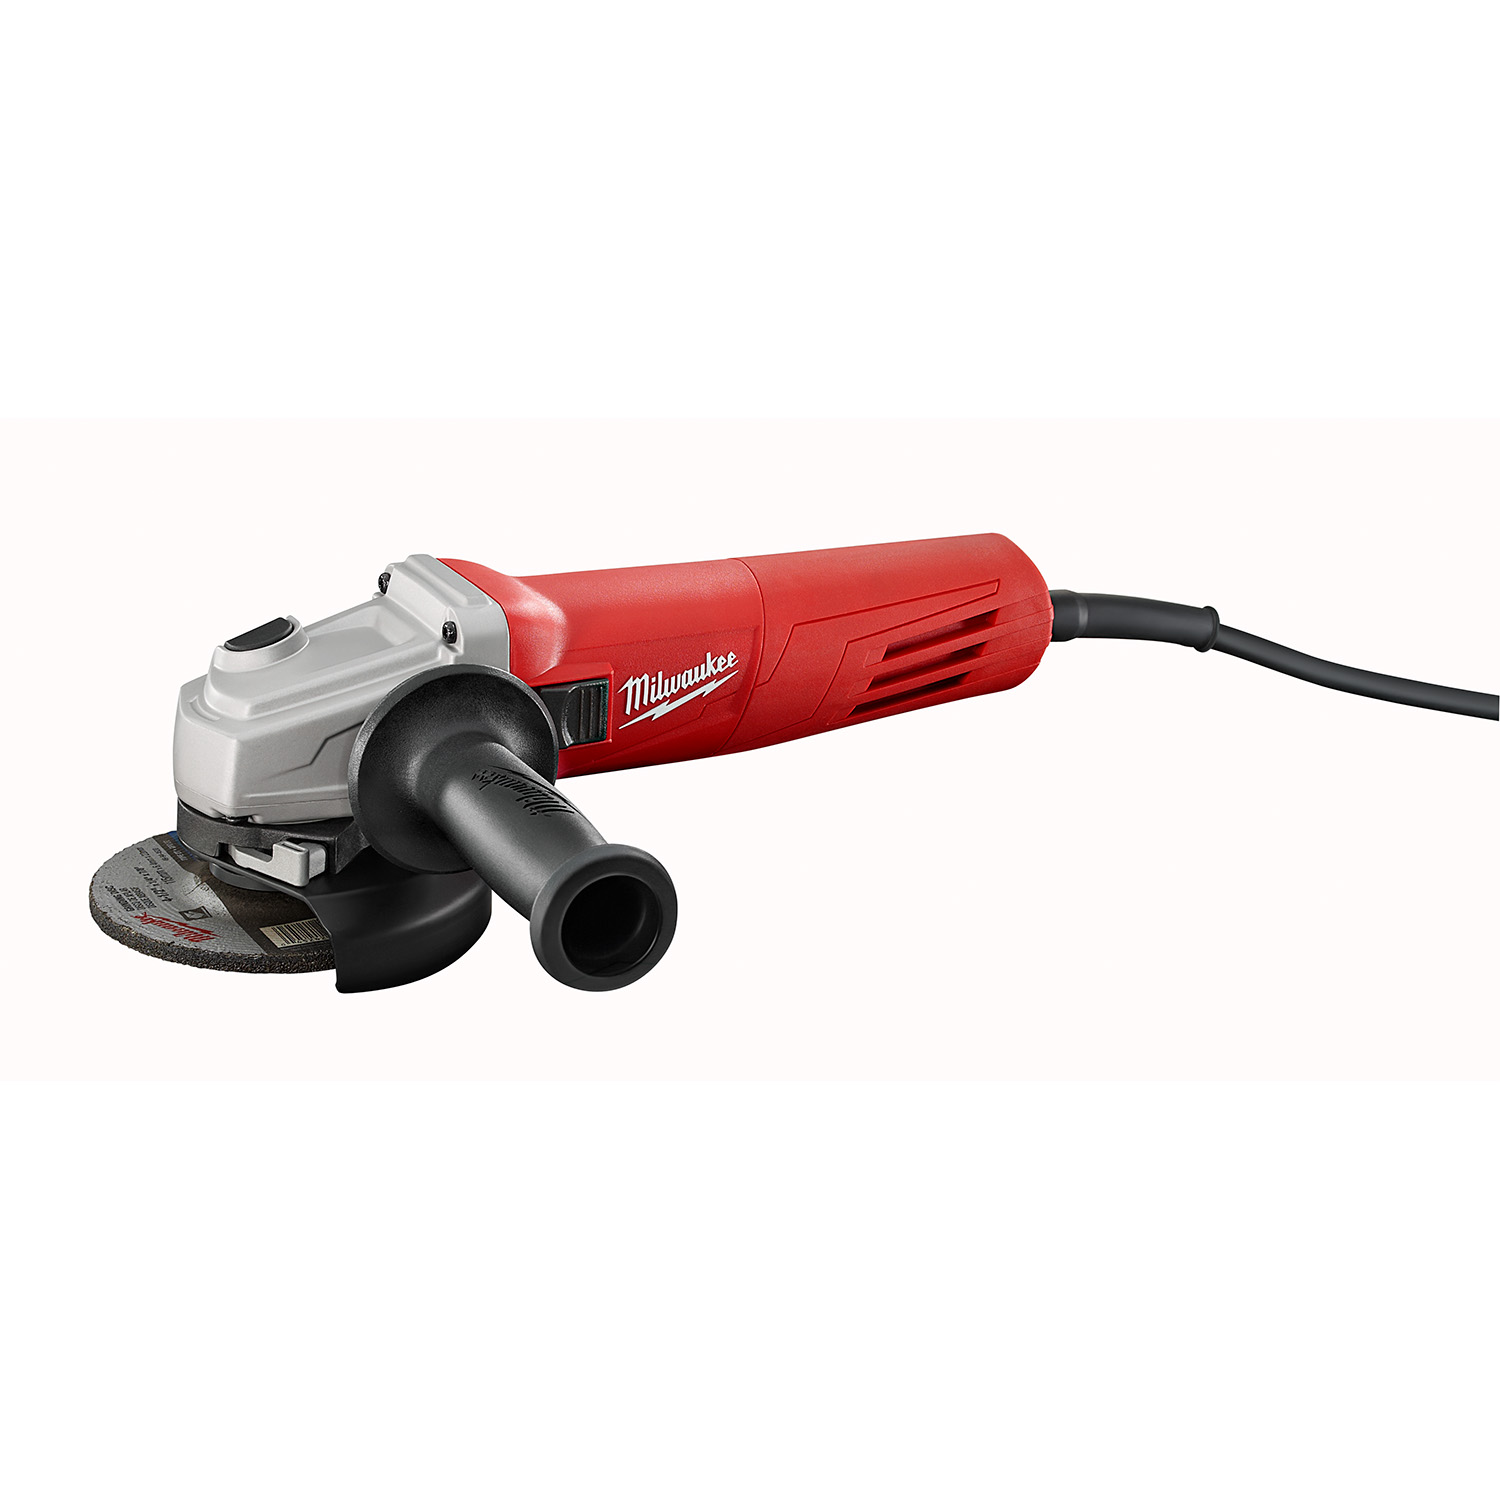 Milwaukee 11 Amp 4-1/2 Inch Small Angle Grinder with Slide Lock-On Switch from GME Supply